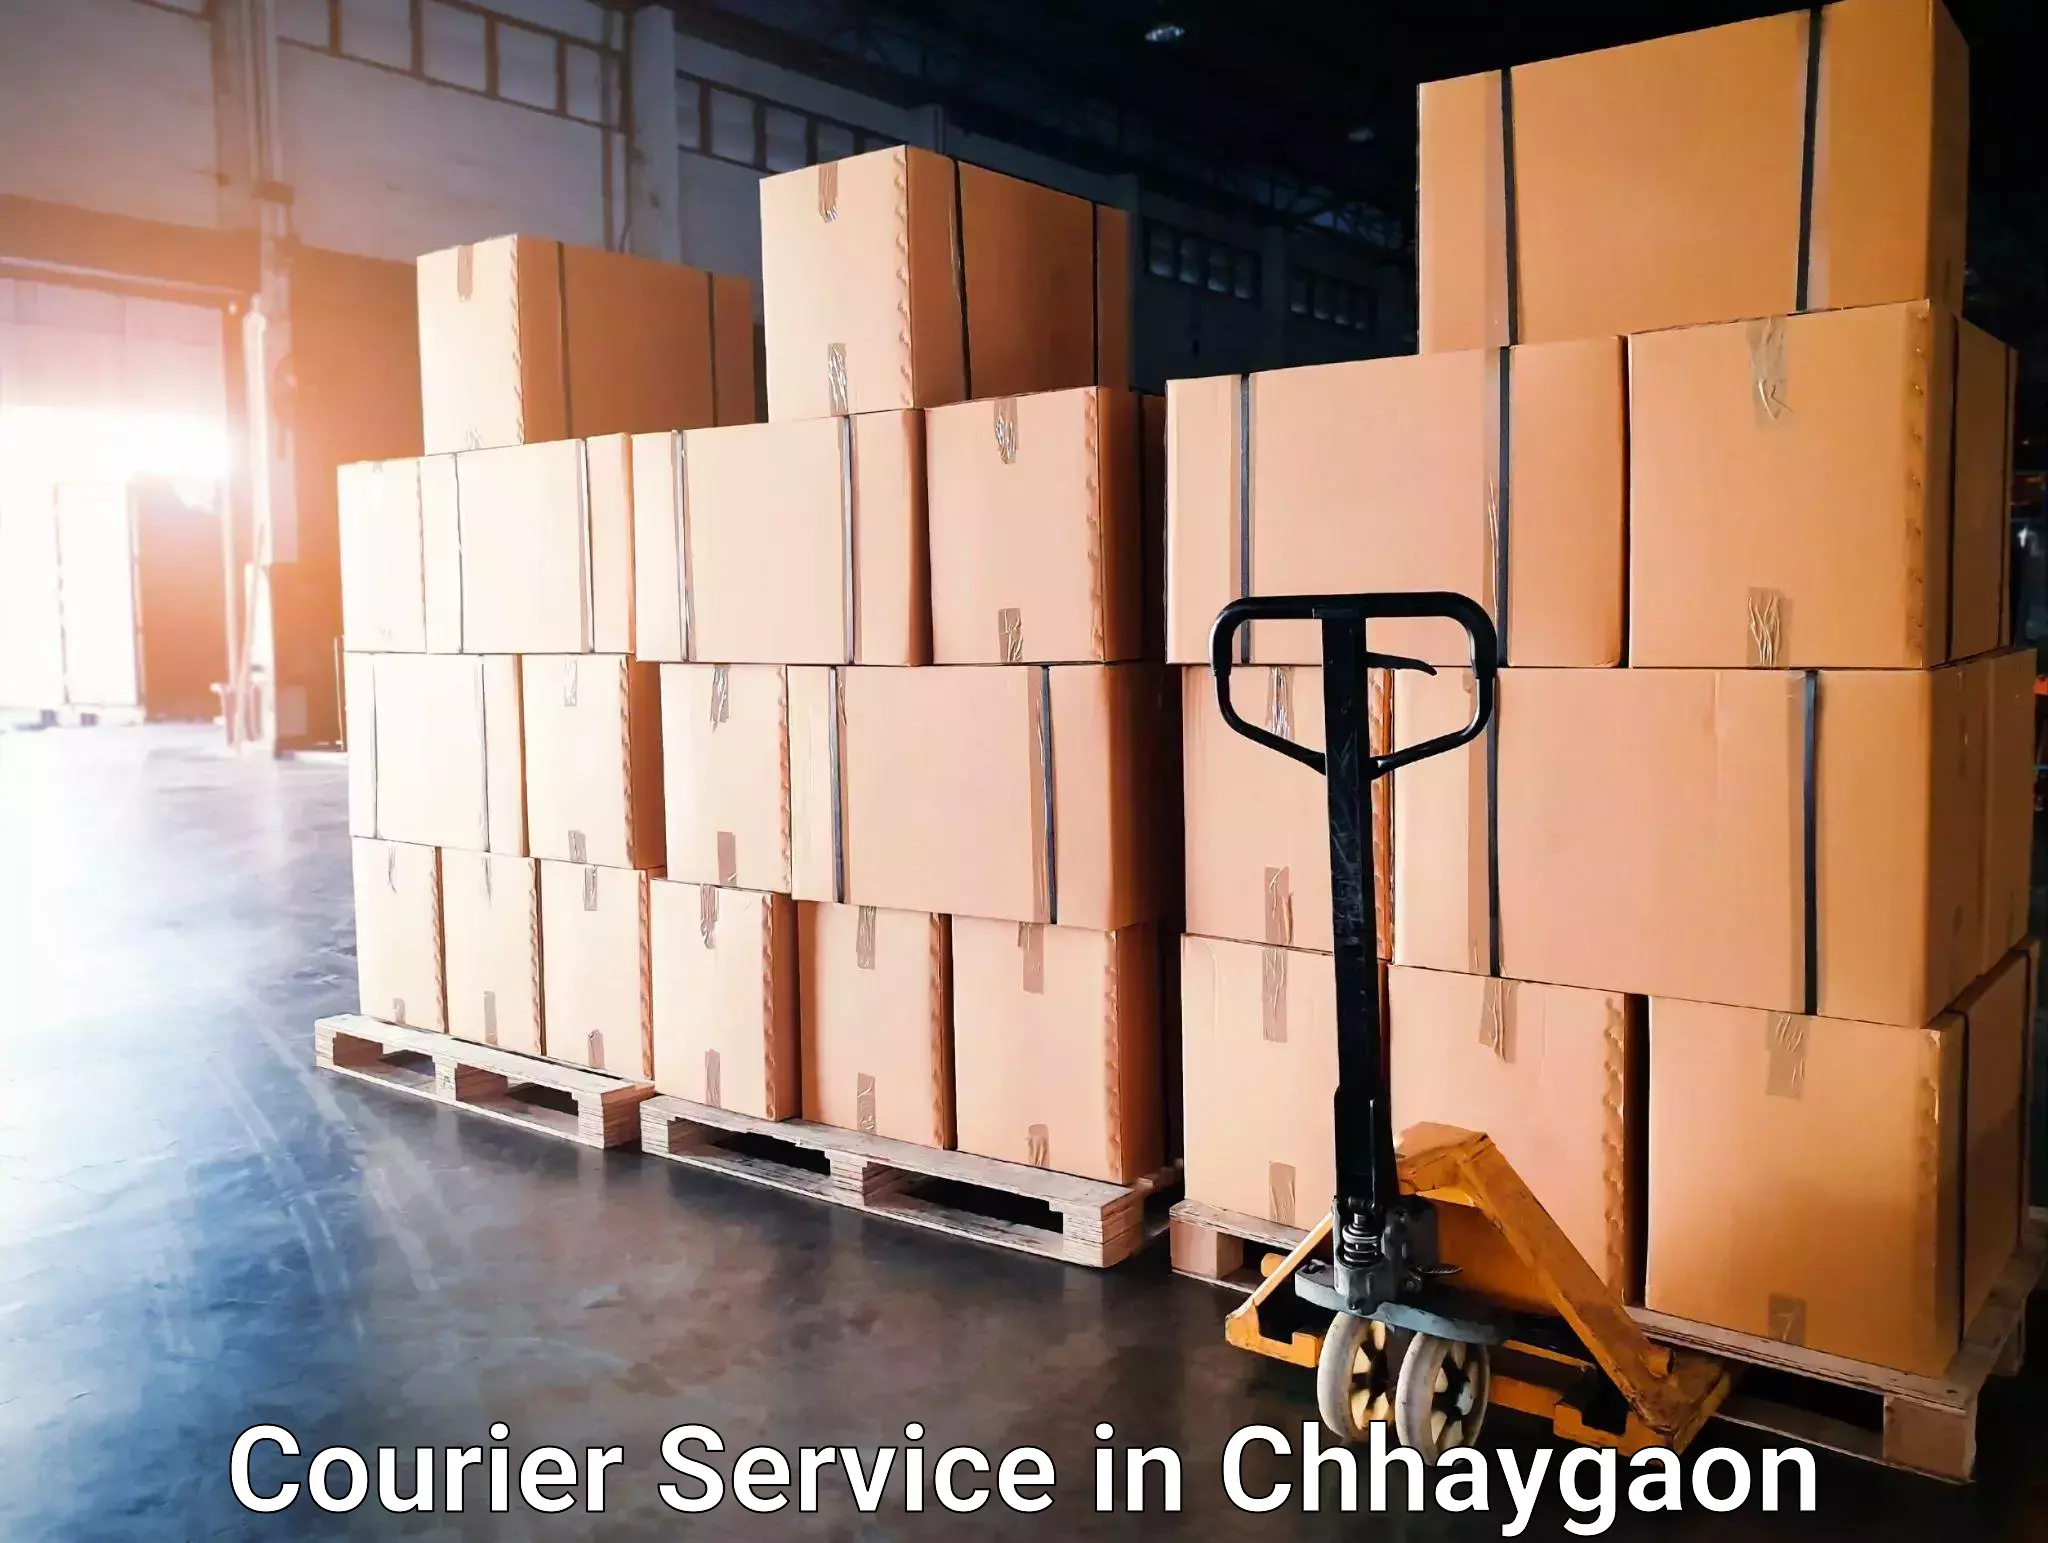 Business delivery service in Chhaygaon